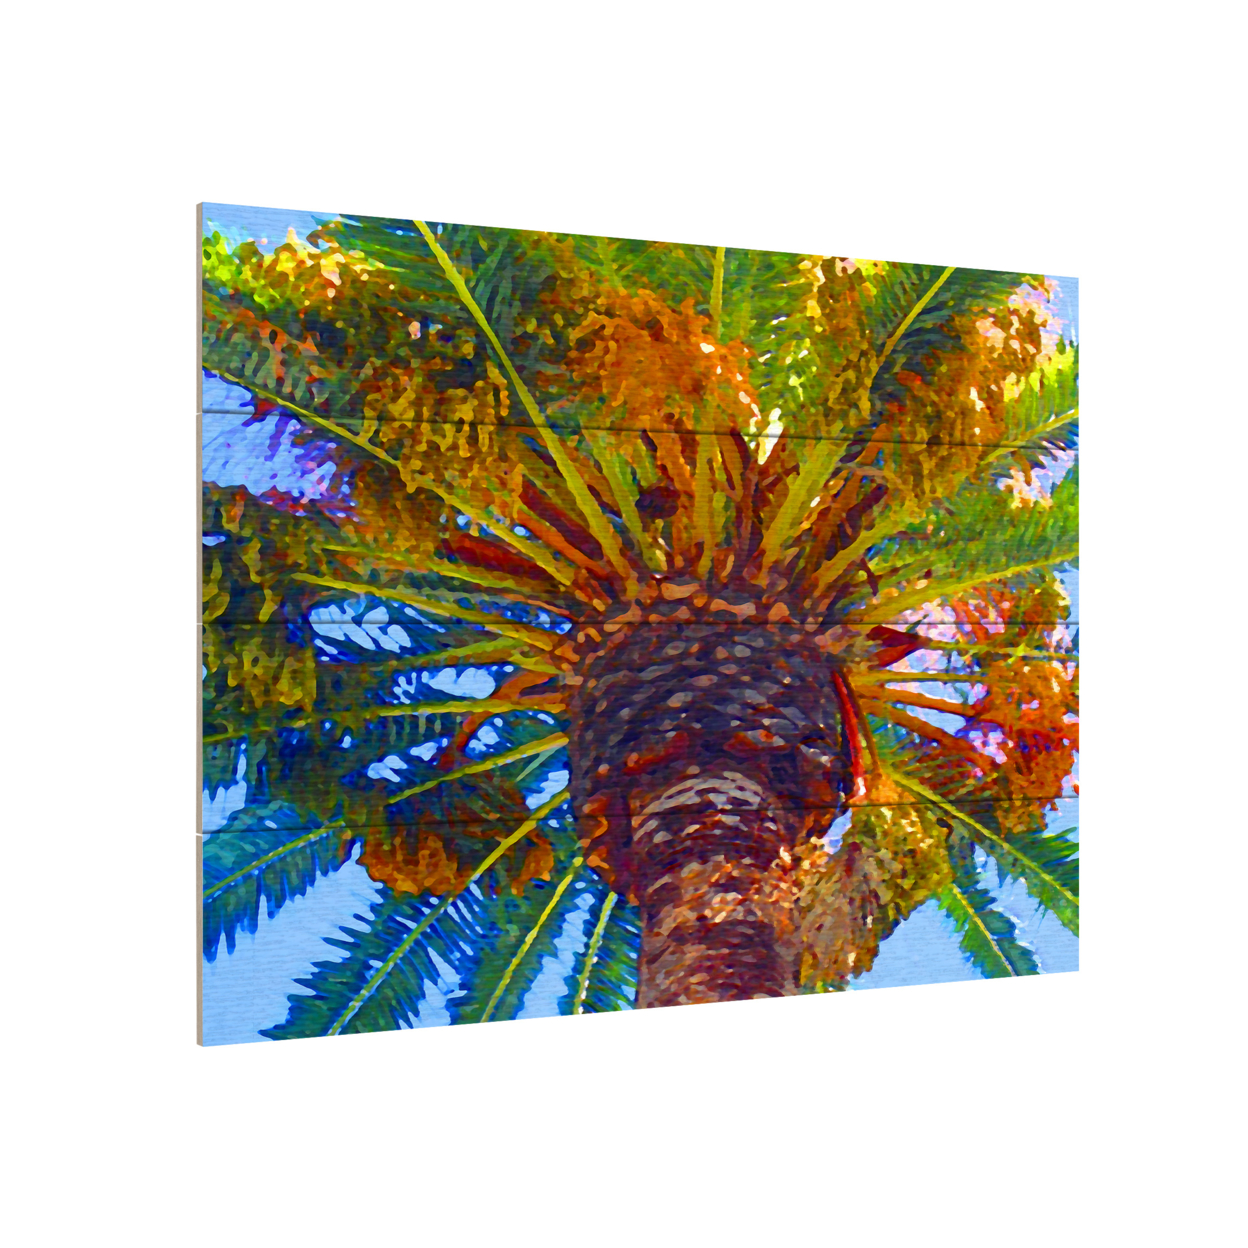 Wall Art 12 X 16 Inches Titled Palm Tree Looking Up Ready To Hang Printed On Wooden Planks